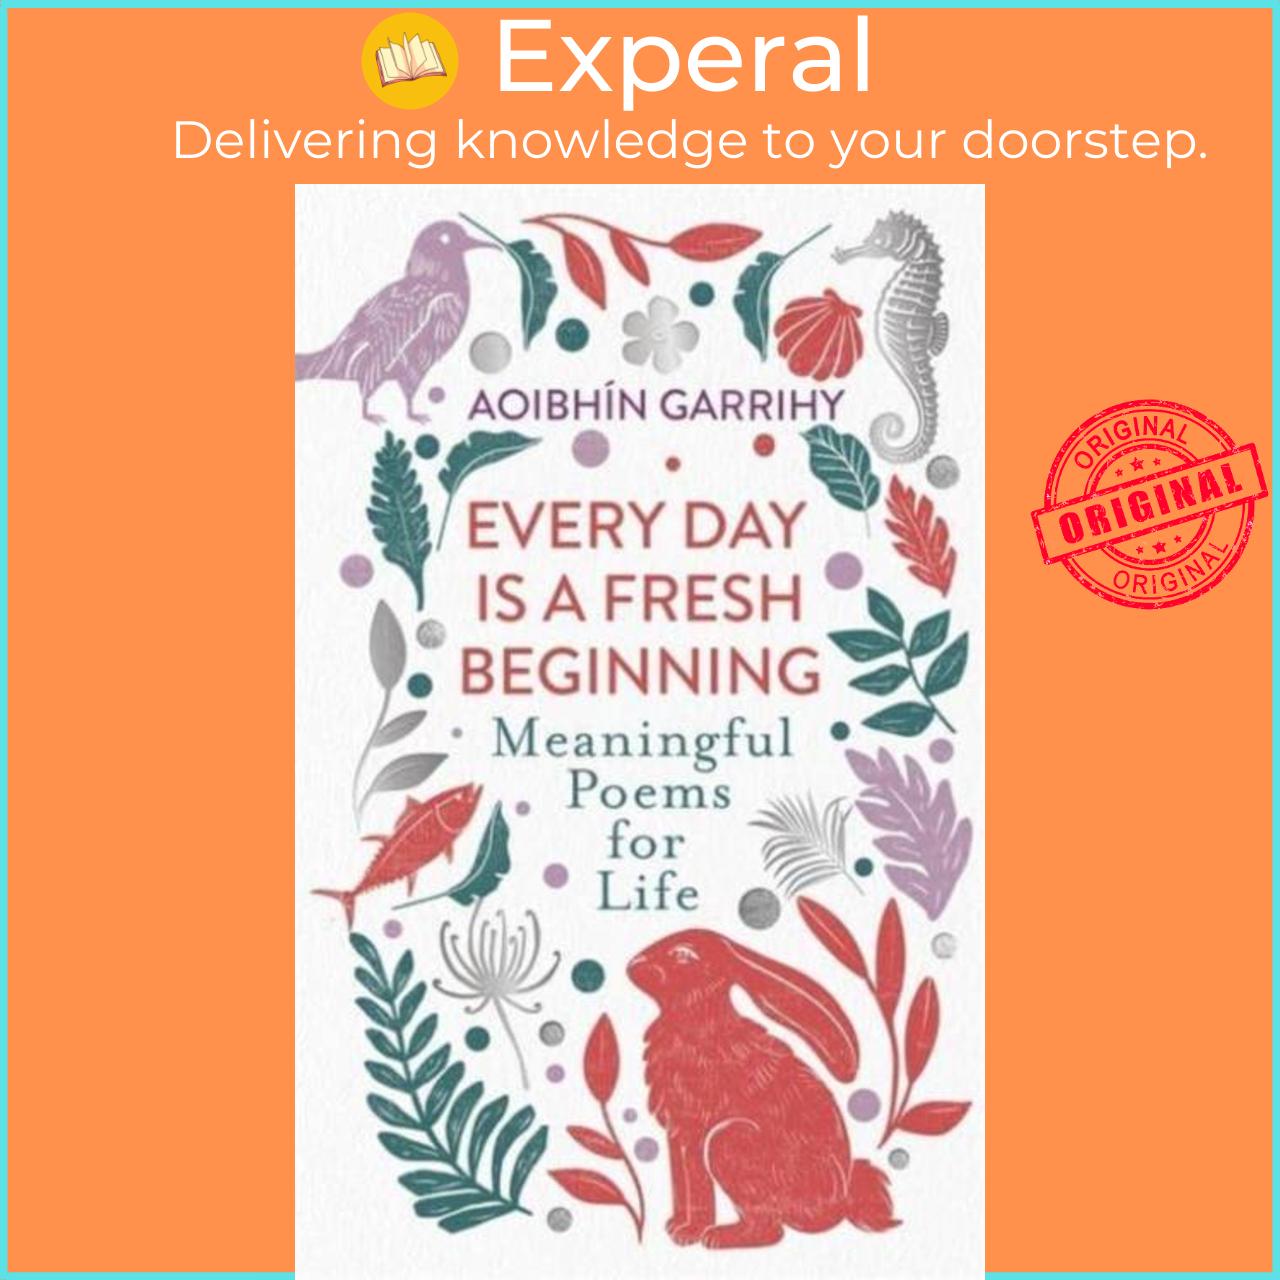 Sách - Every Day is a Fresh Beginning - Meaningful Poems for Life by Aoibhin Garrihy (UK edition, hardcover)